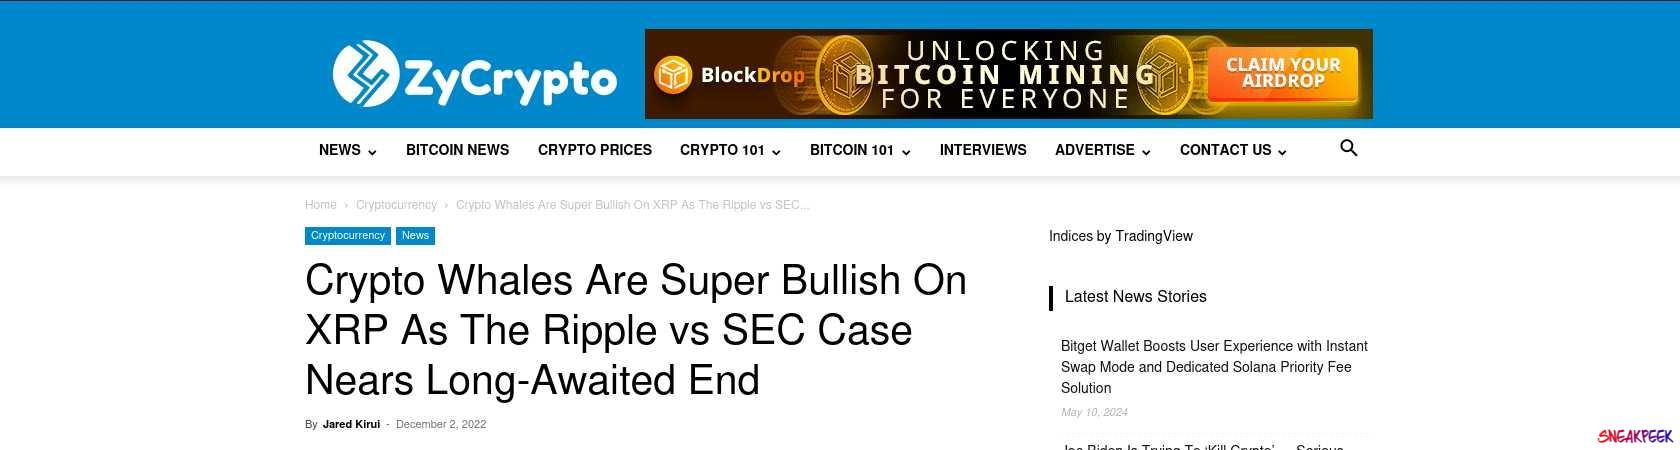 Read the full Article:  ⭲ Crypto Whales Are Super Bullish On XRP As The Ripple vs SEC Case Nears Long-Awaited End